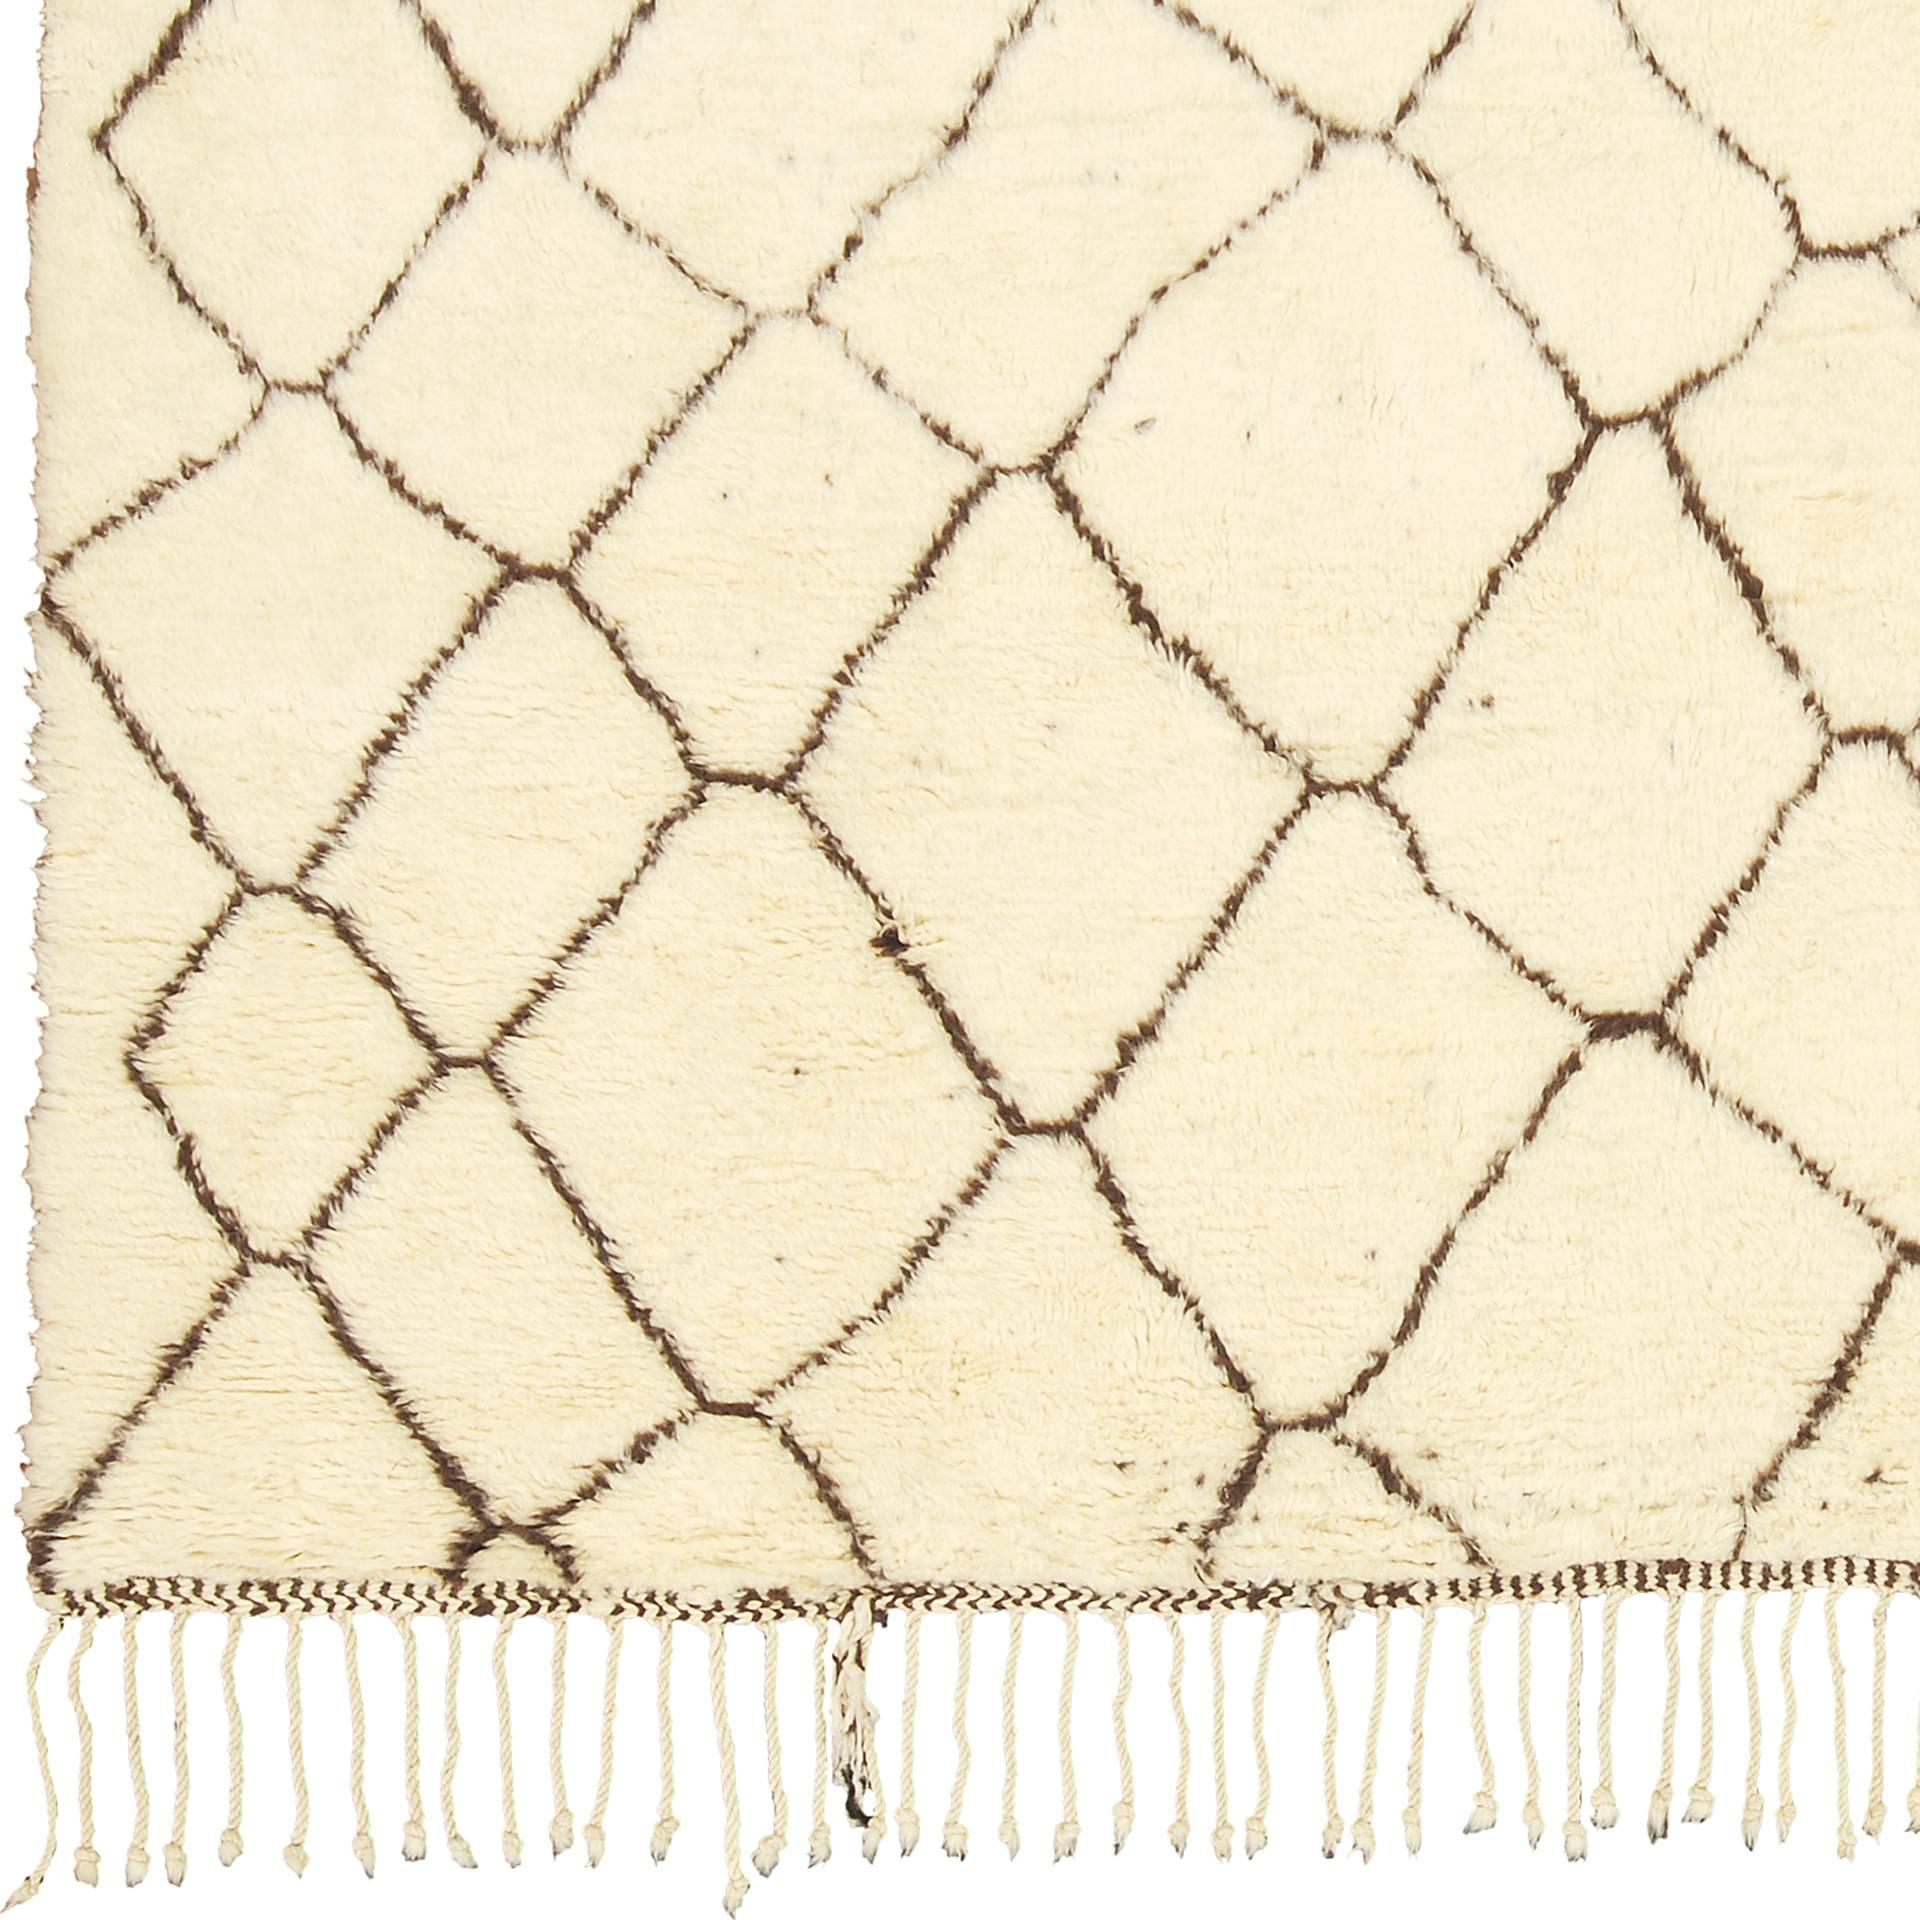 Beni Ourain carpet, Morocco. Originating from the Northeastern Azilal province of the Moroccan high Atlas region, this fascinatingly modern was instinctively woven by Berber tribes. Neutral shades vary from white to brown natural wool.